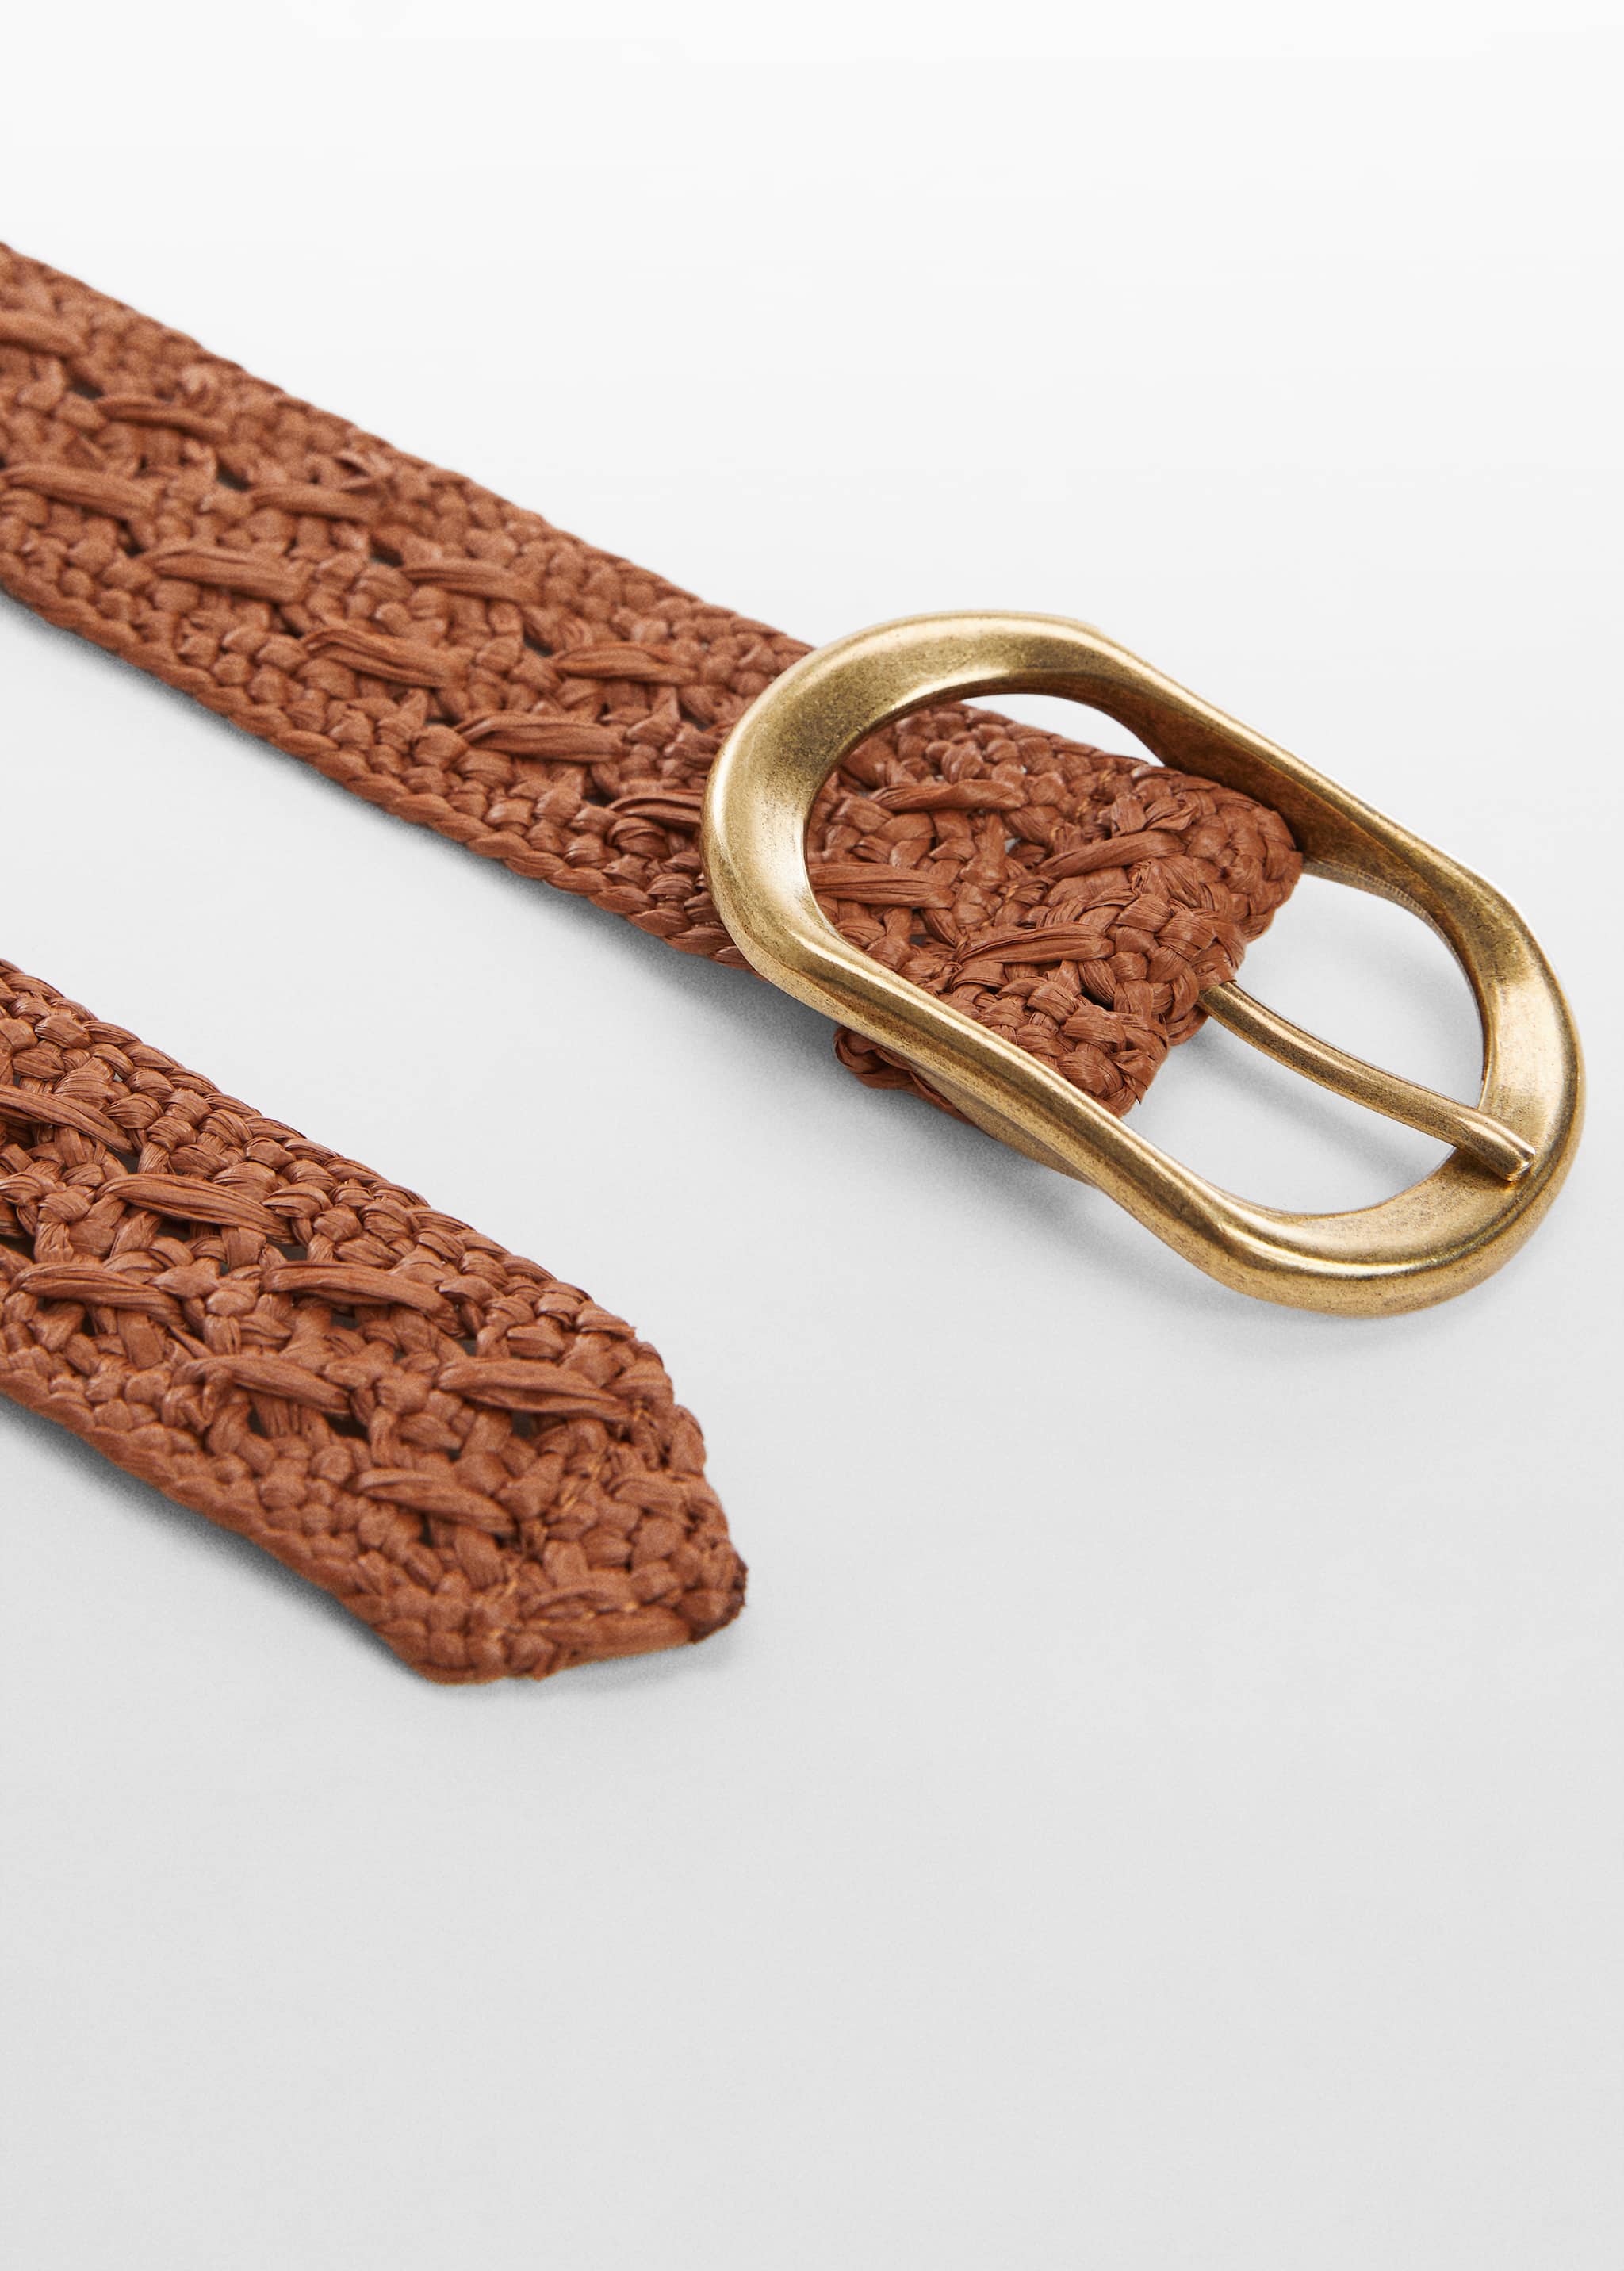 Crochet belt with buckle - Details of the article 1